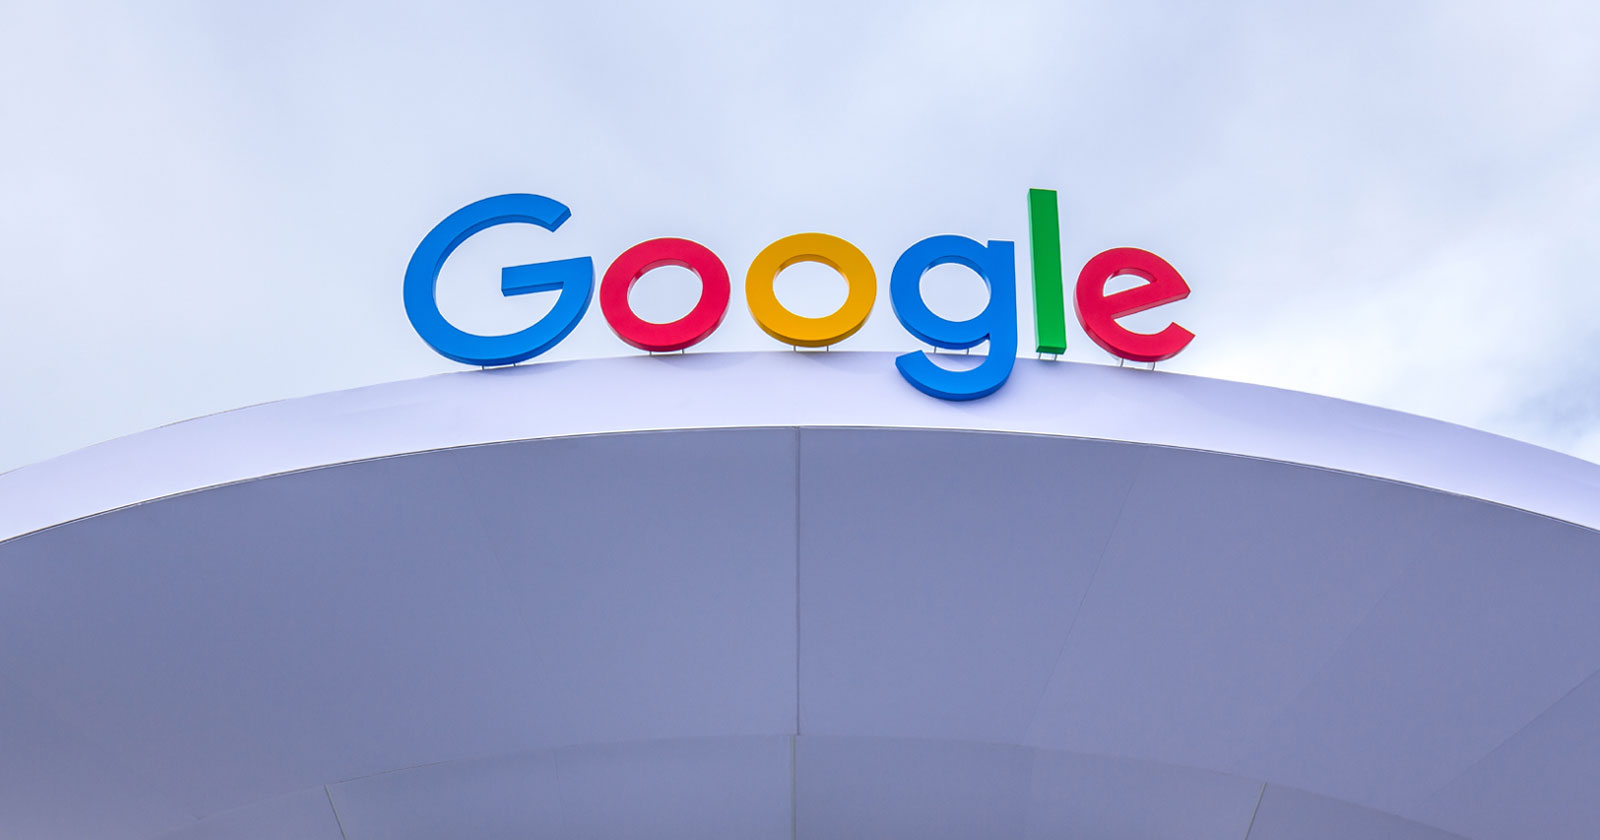 Google Announces A New Carousel Rich Result